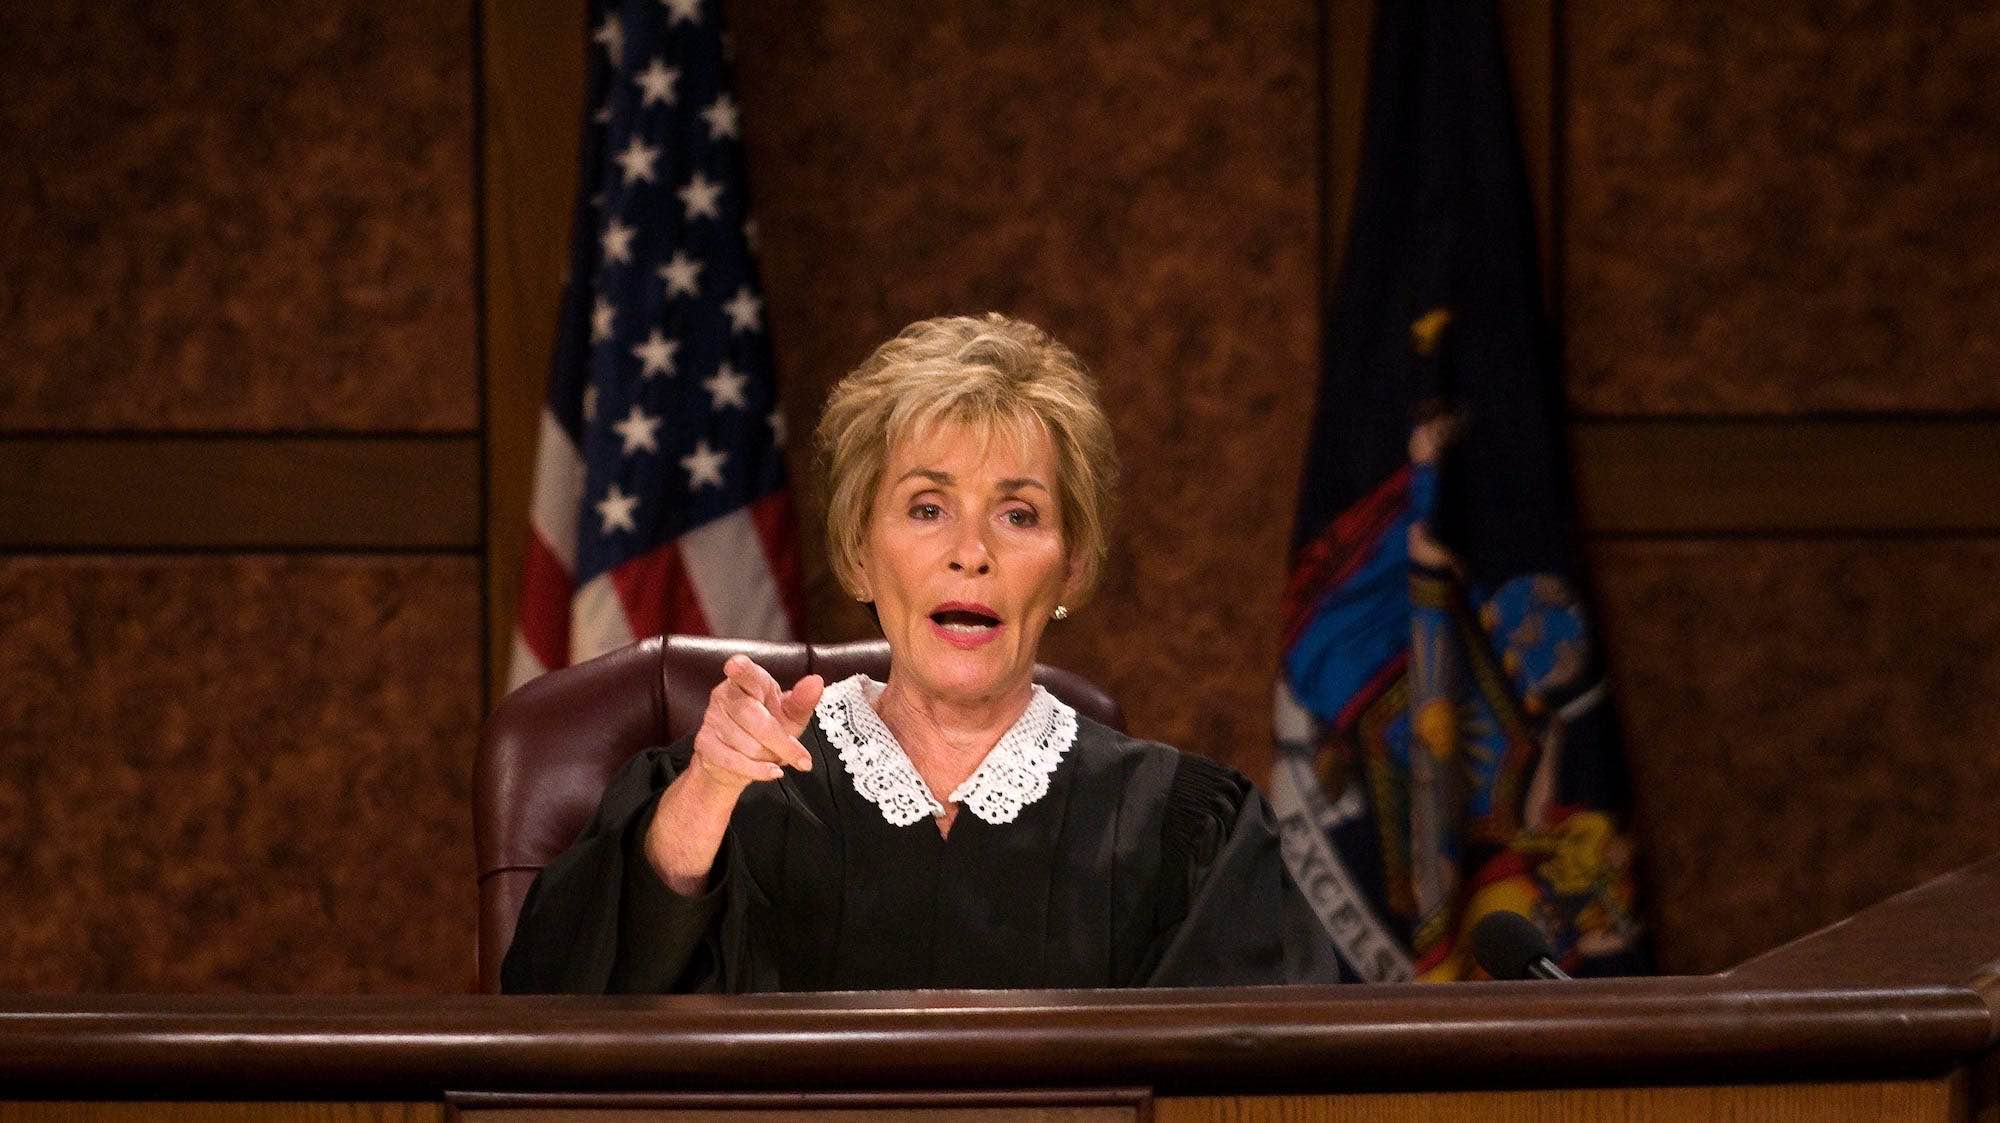 Celebrate Judge Judy #39 s return to TV with these infamous episodes Film